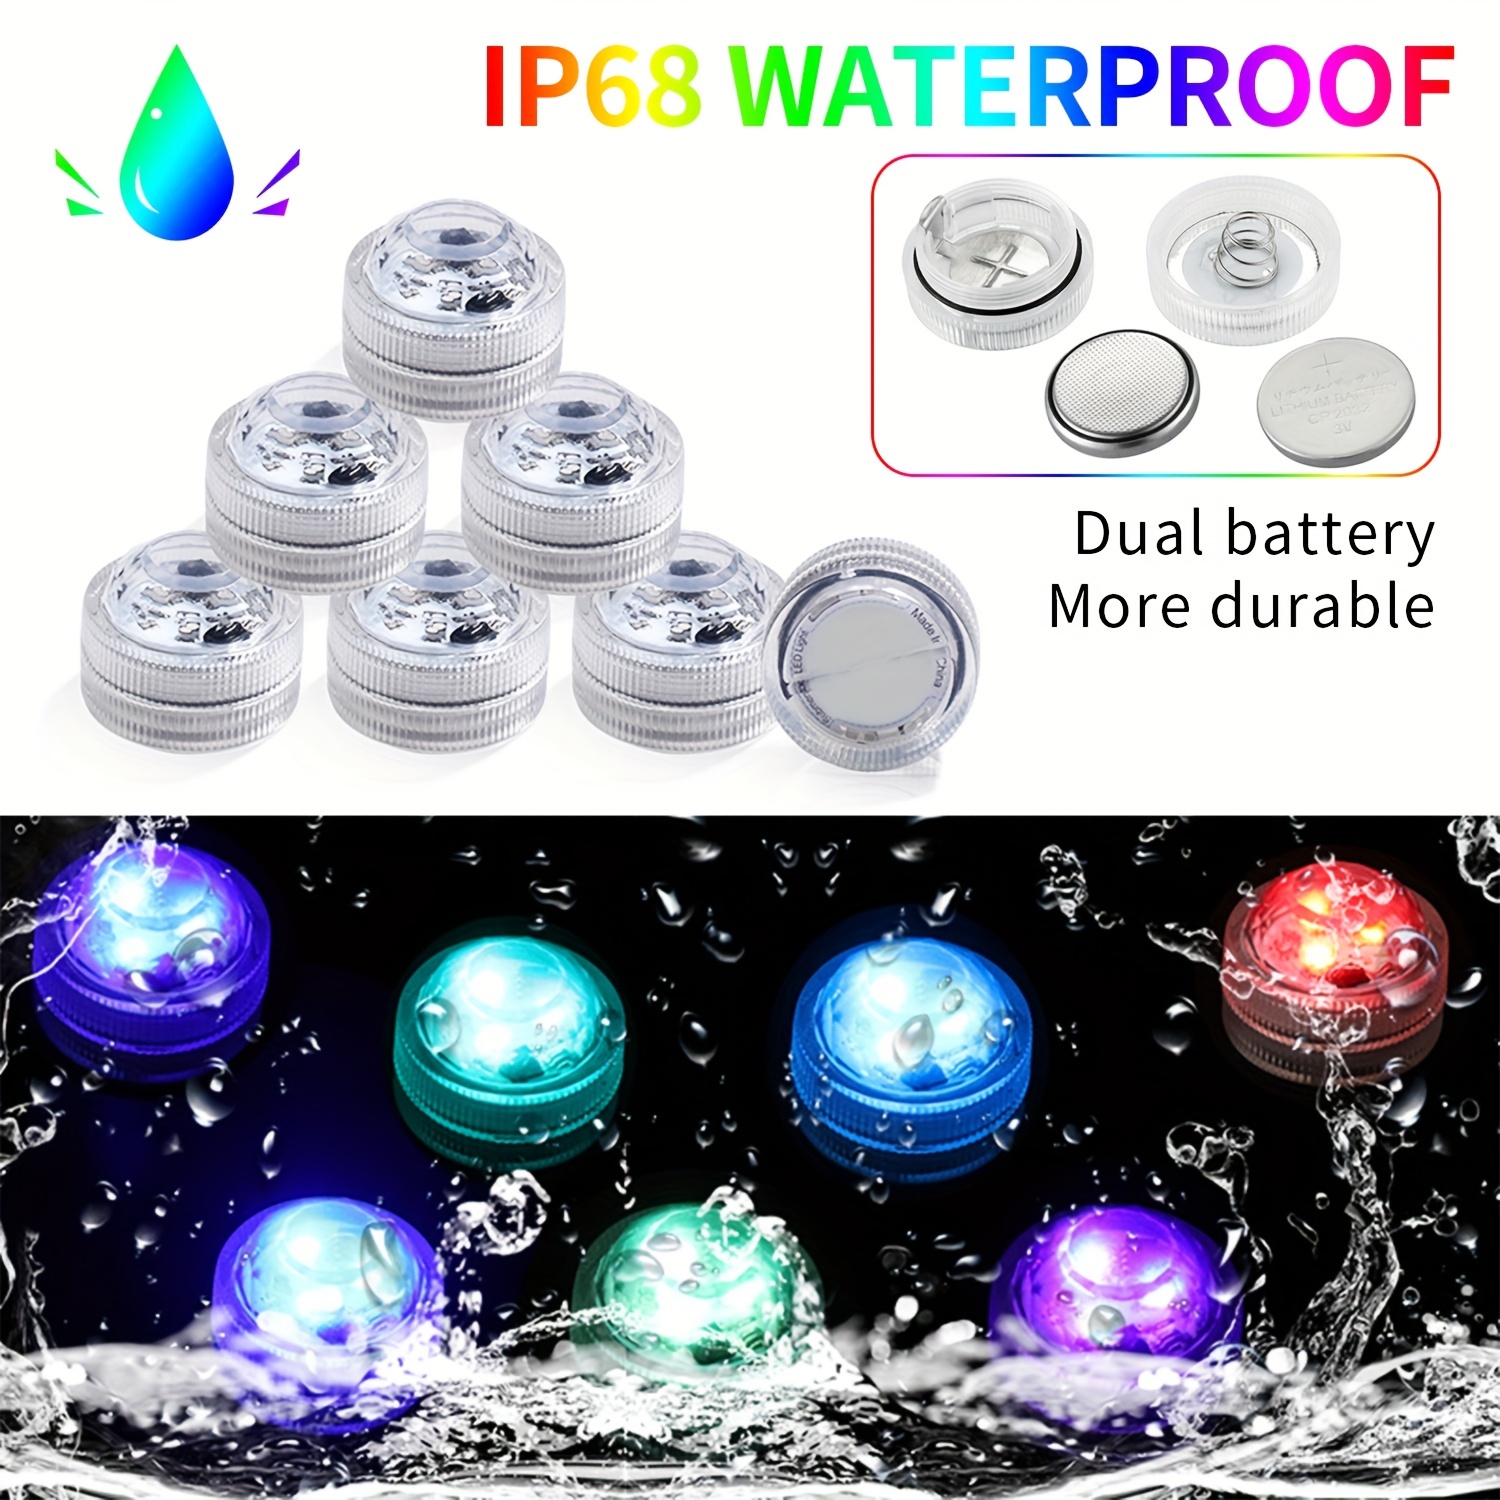 Waterproof LED Tea Lights with Remote - Multi-Color